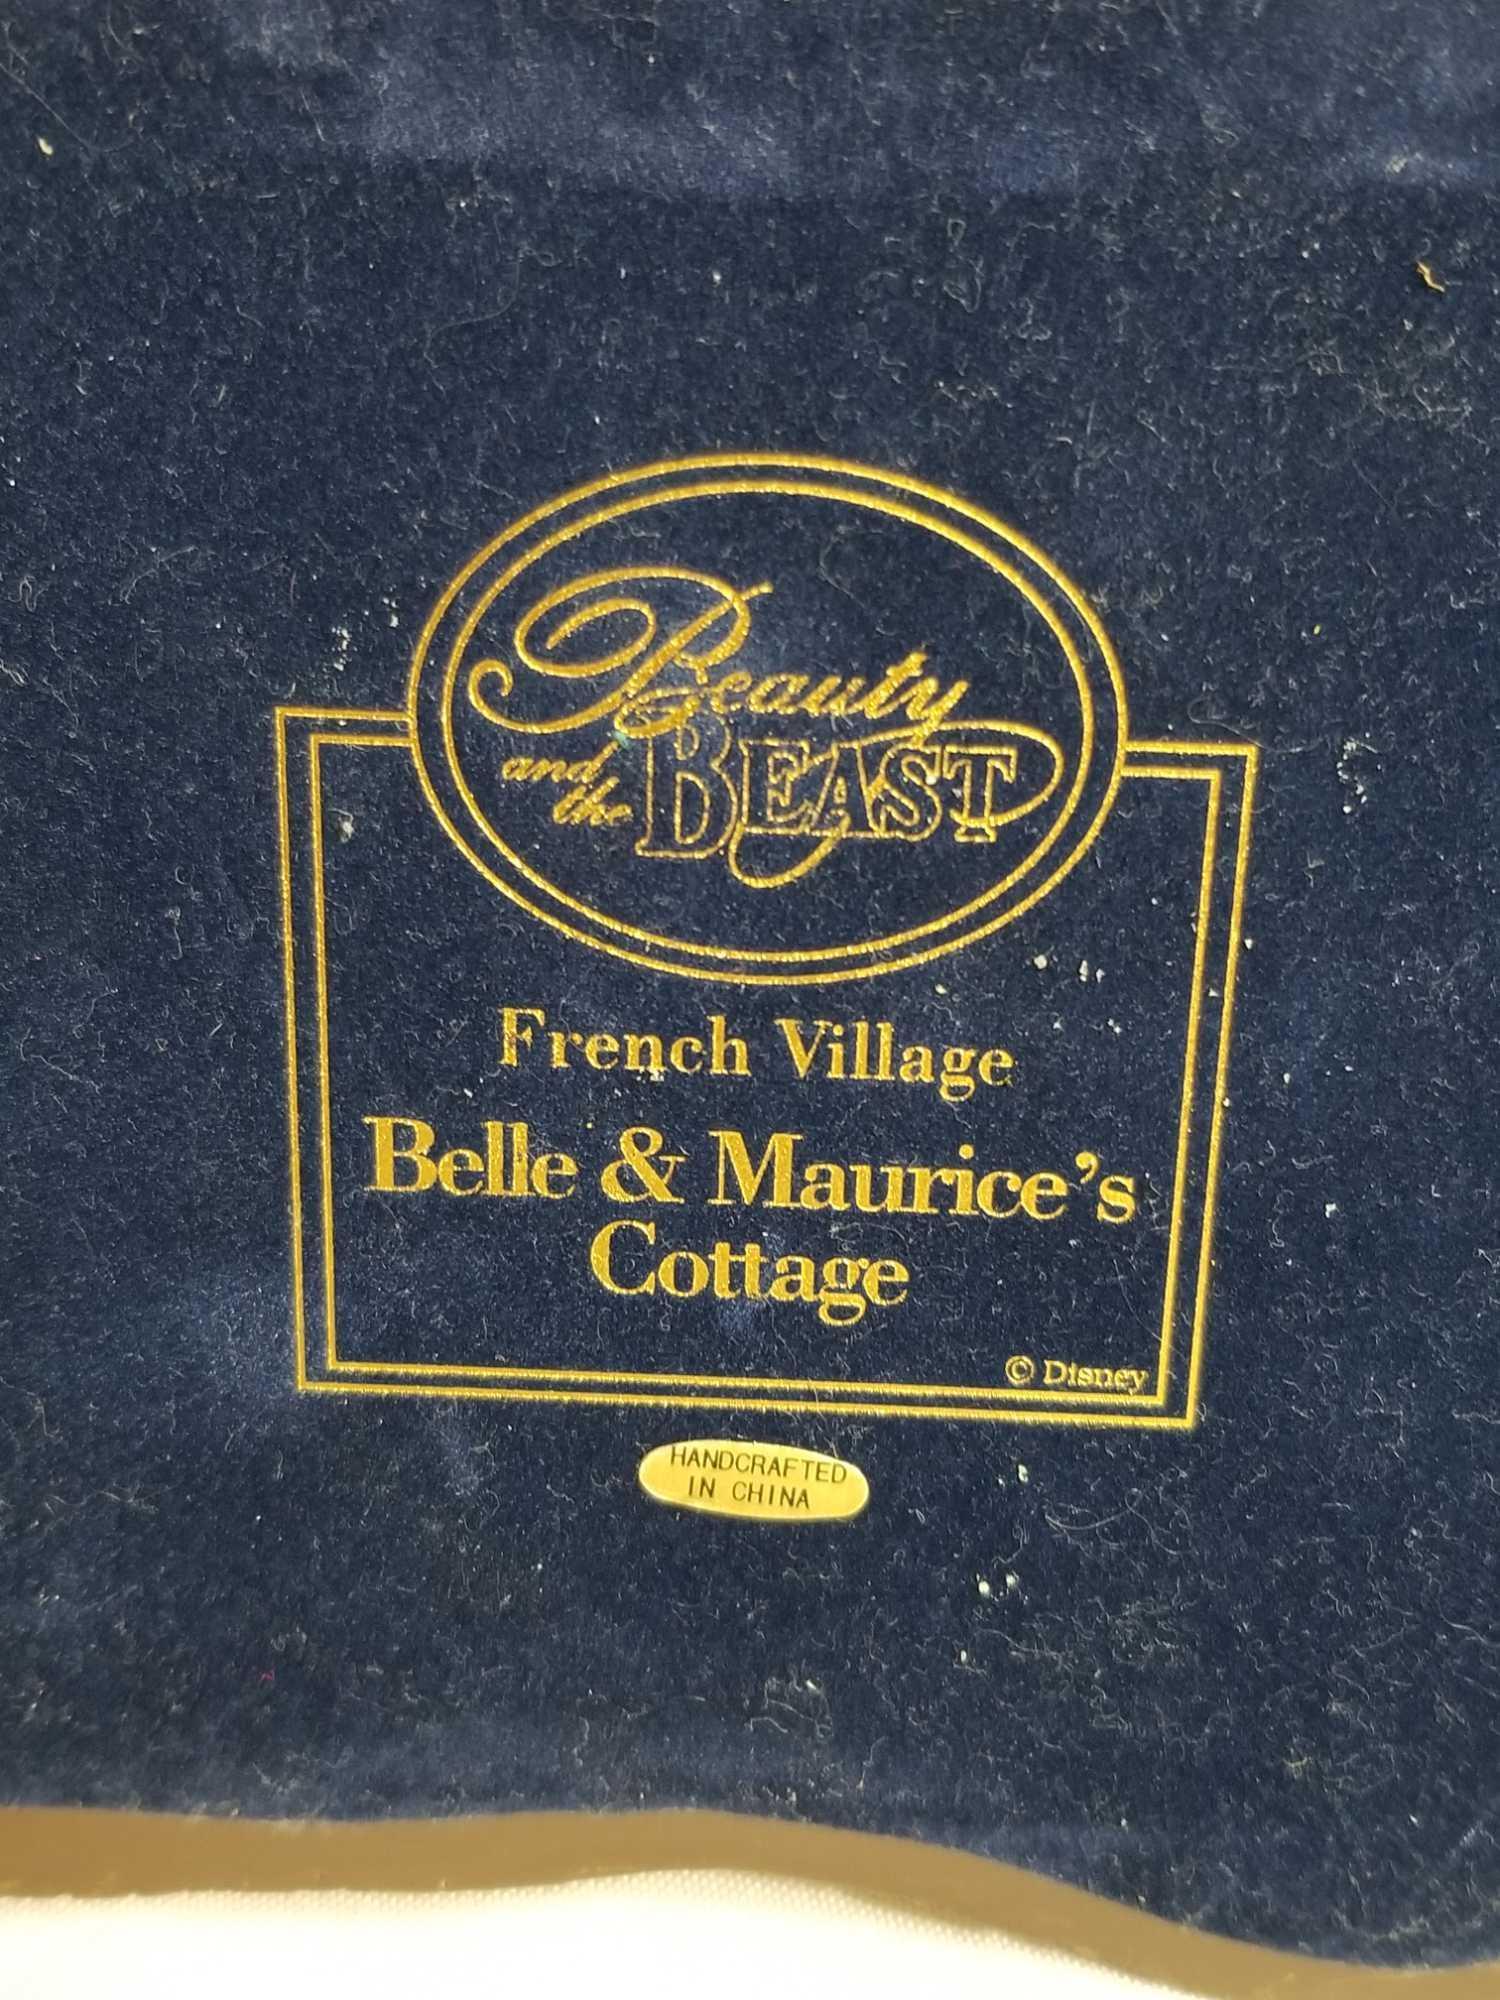 Beauty and the Beast French Village Belle Maurices Cottage